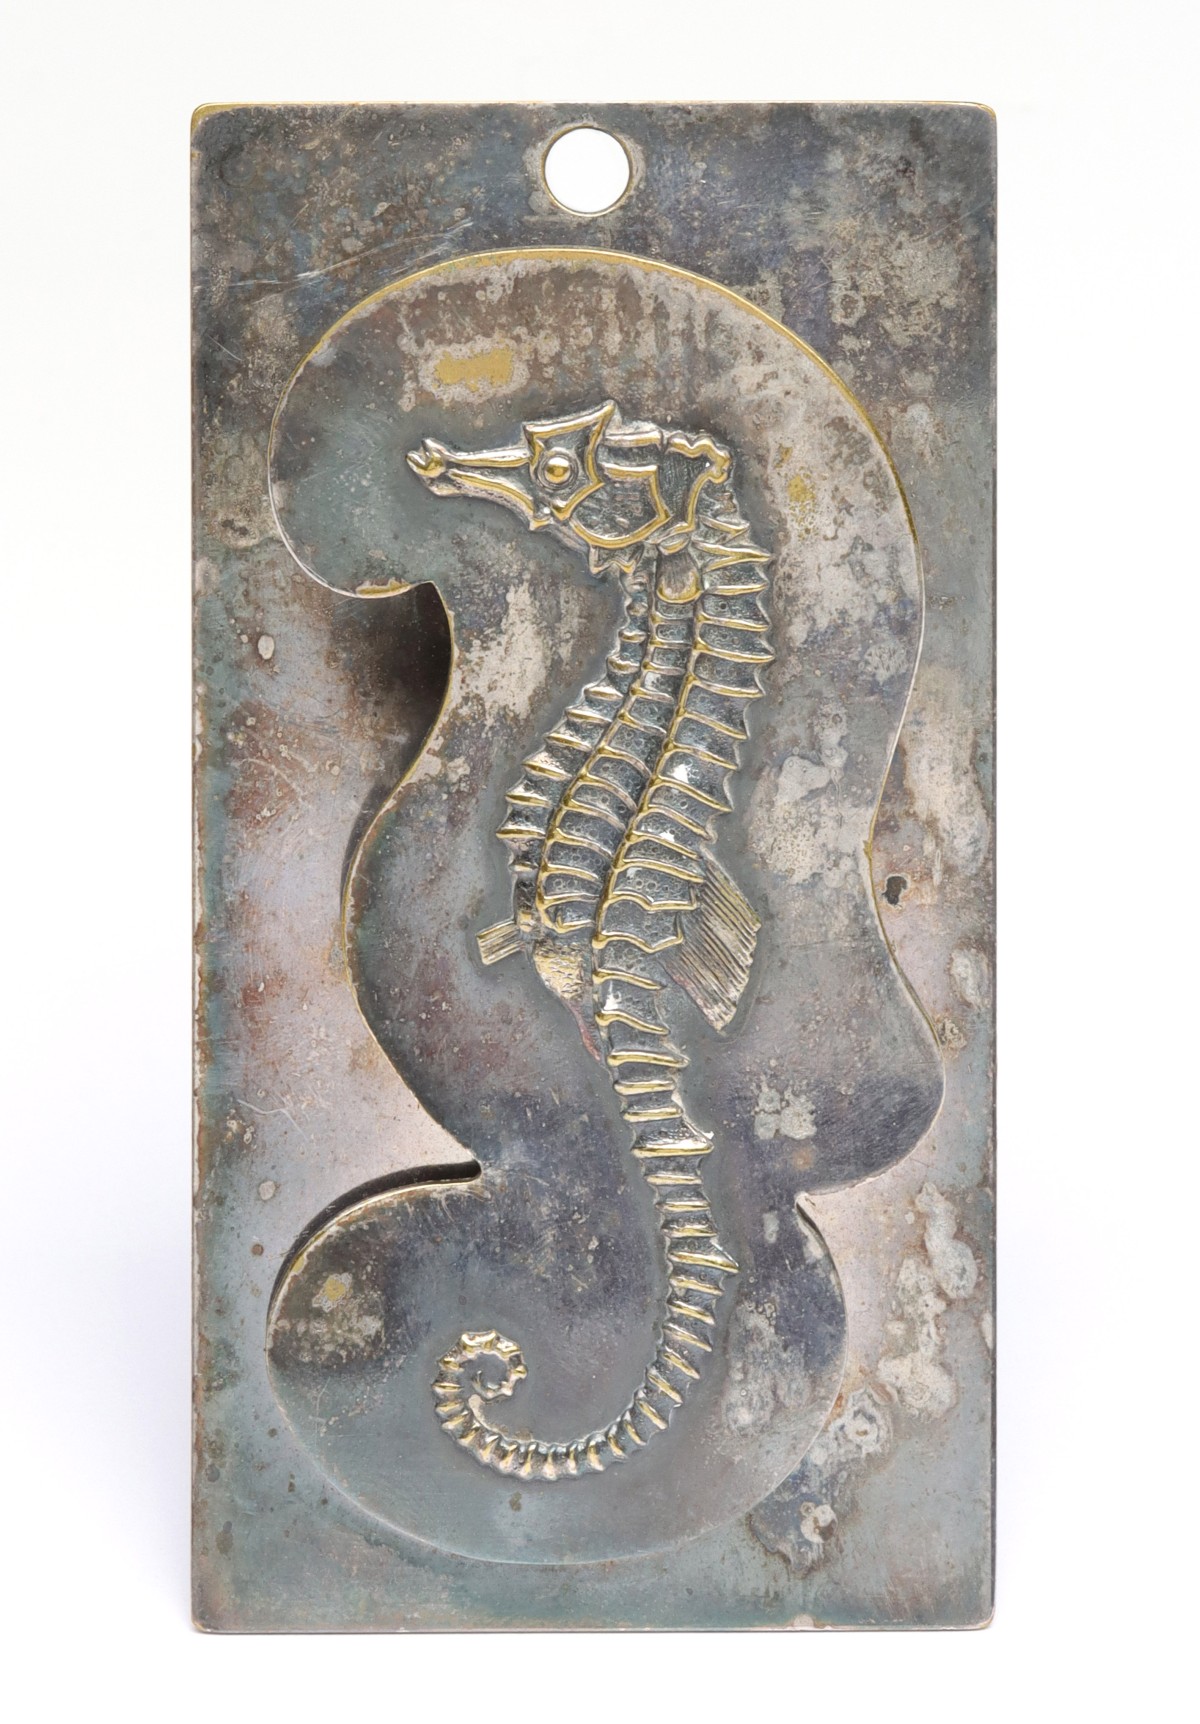 SILVER PLATED LETTER CLIP WITH SEAHORSE 1880-1910